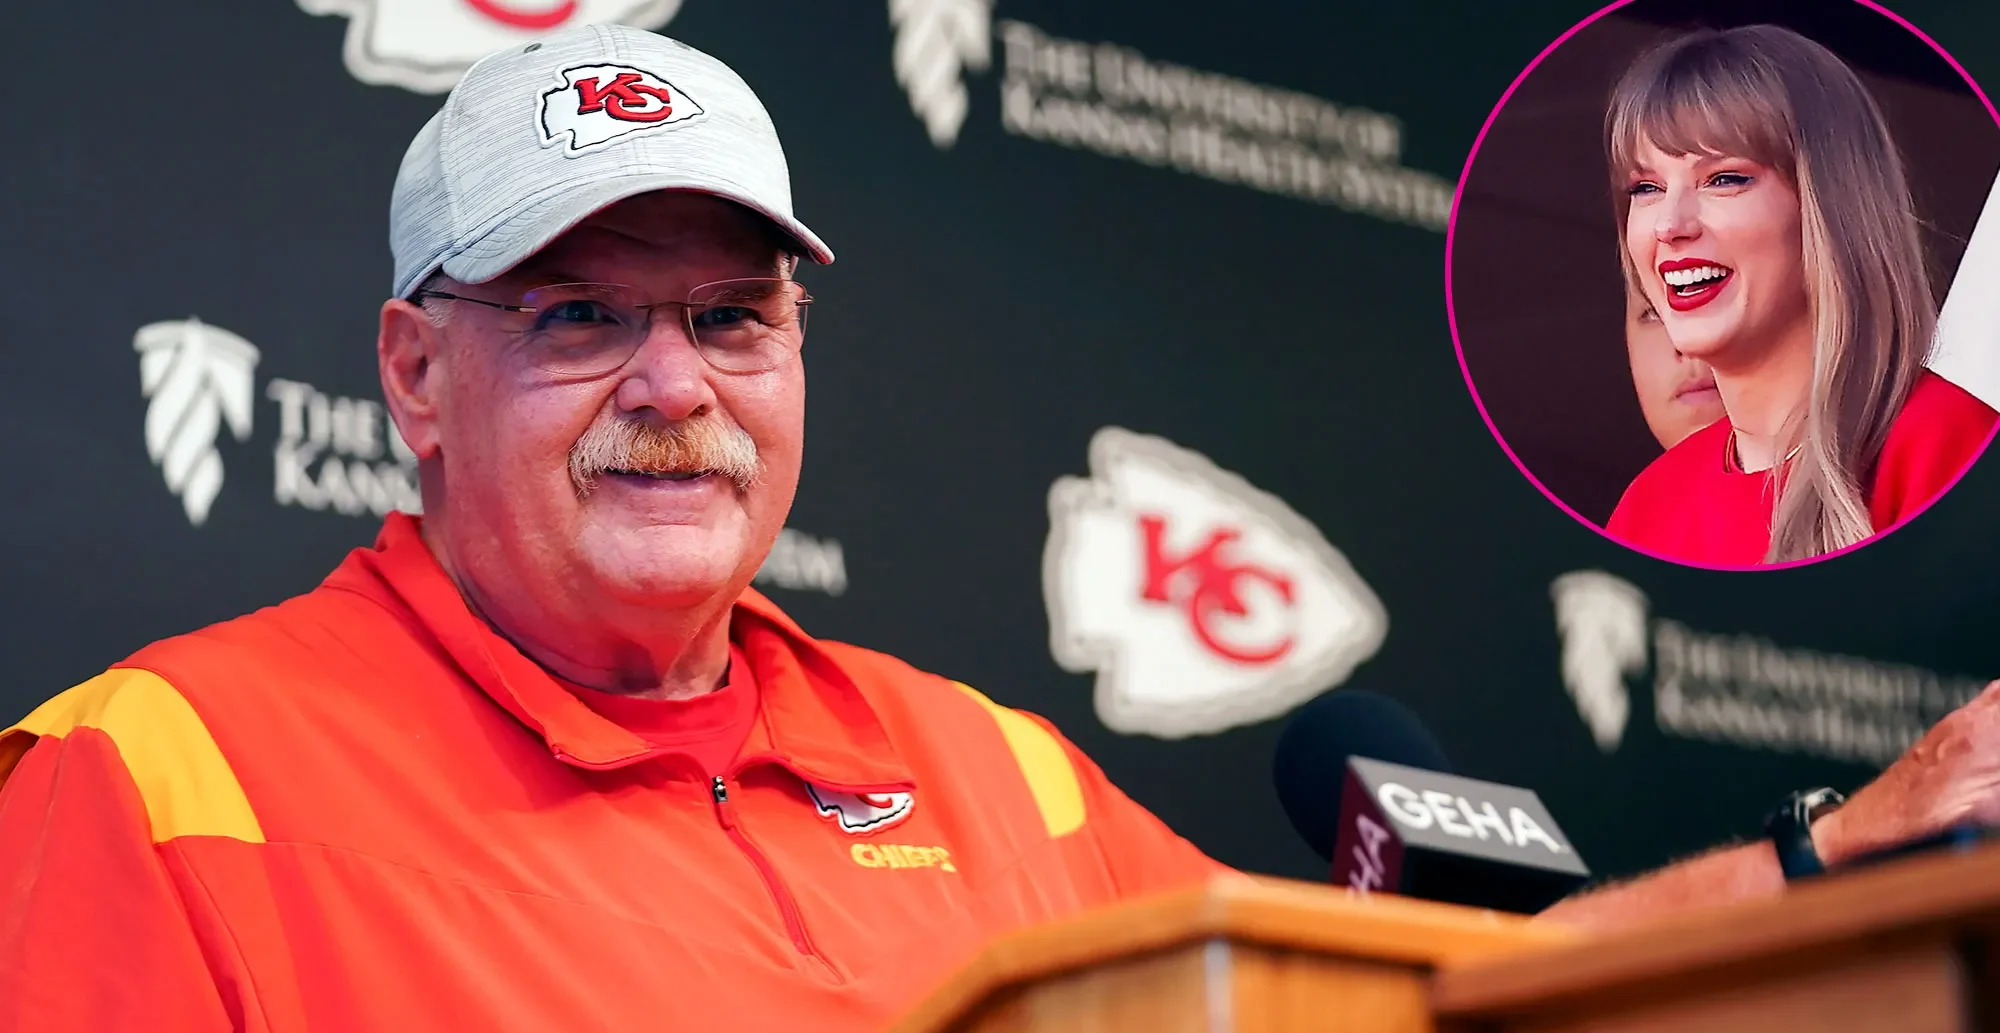 Andy Reid's wife moved to tears as Taylor Swift delivers a heartwarming surprise during her 61st birthday celebration.